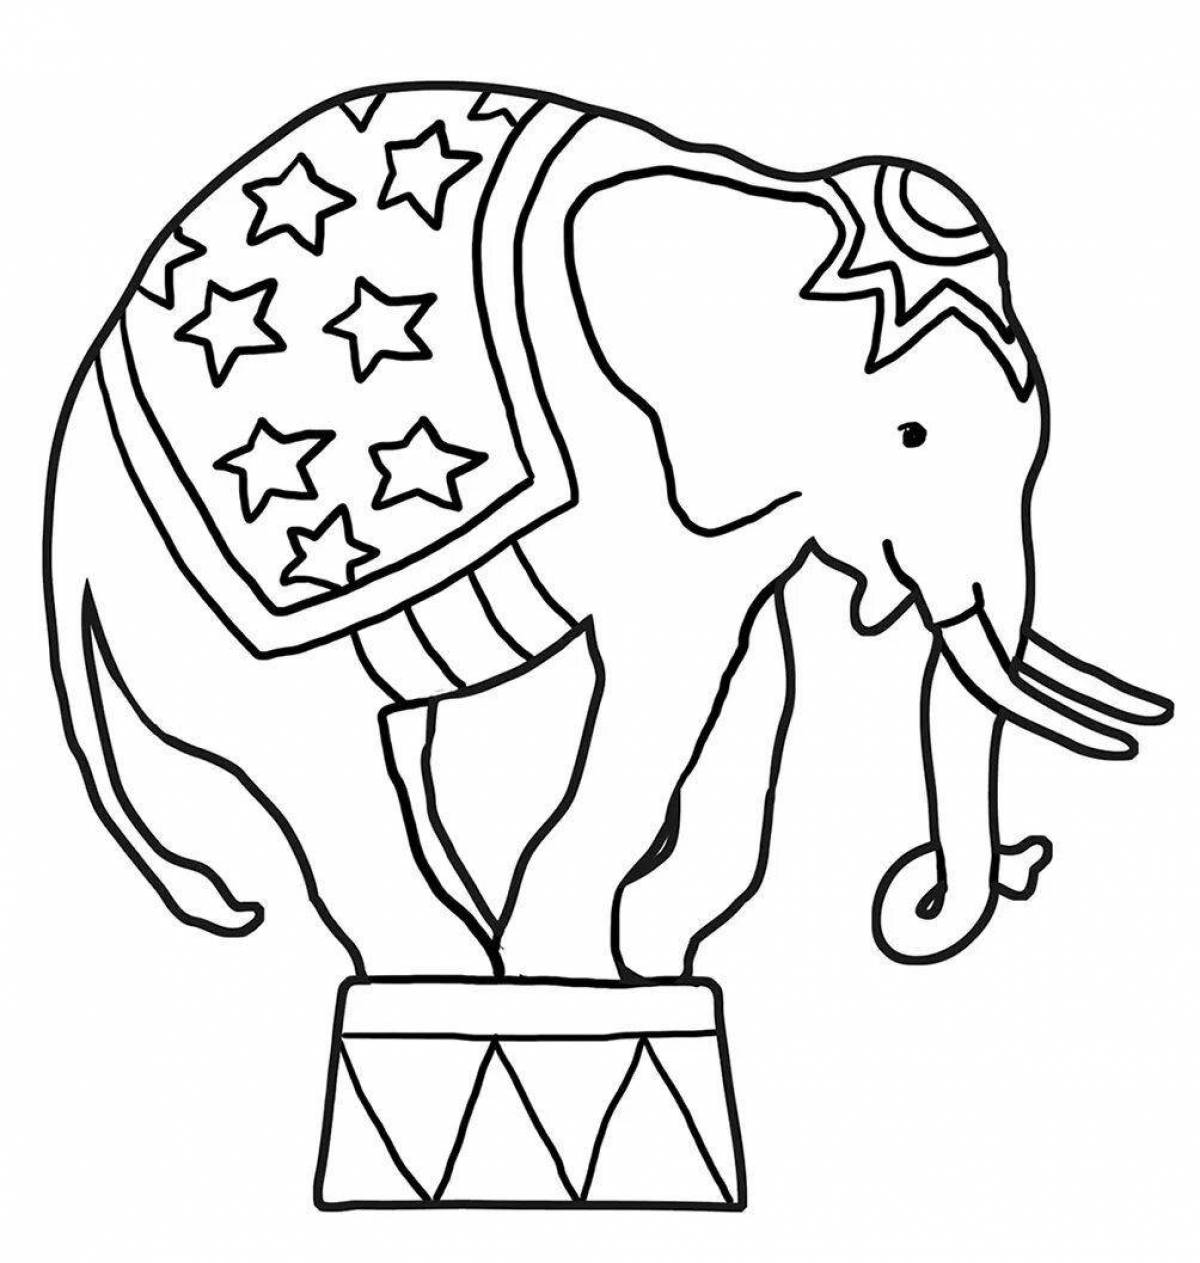 Coloring page of a spectacular circus elephant